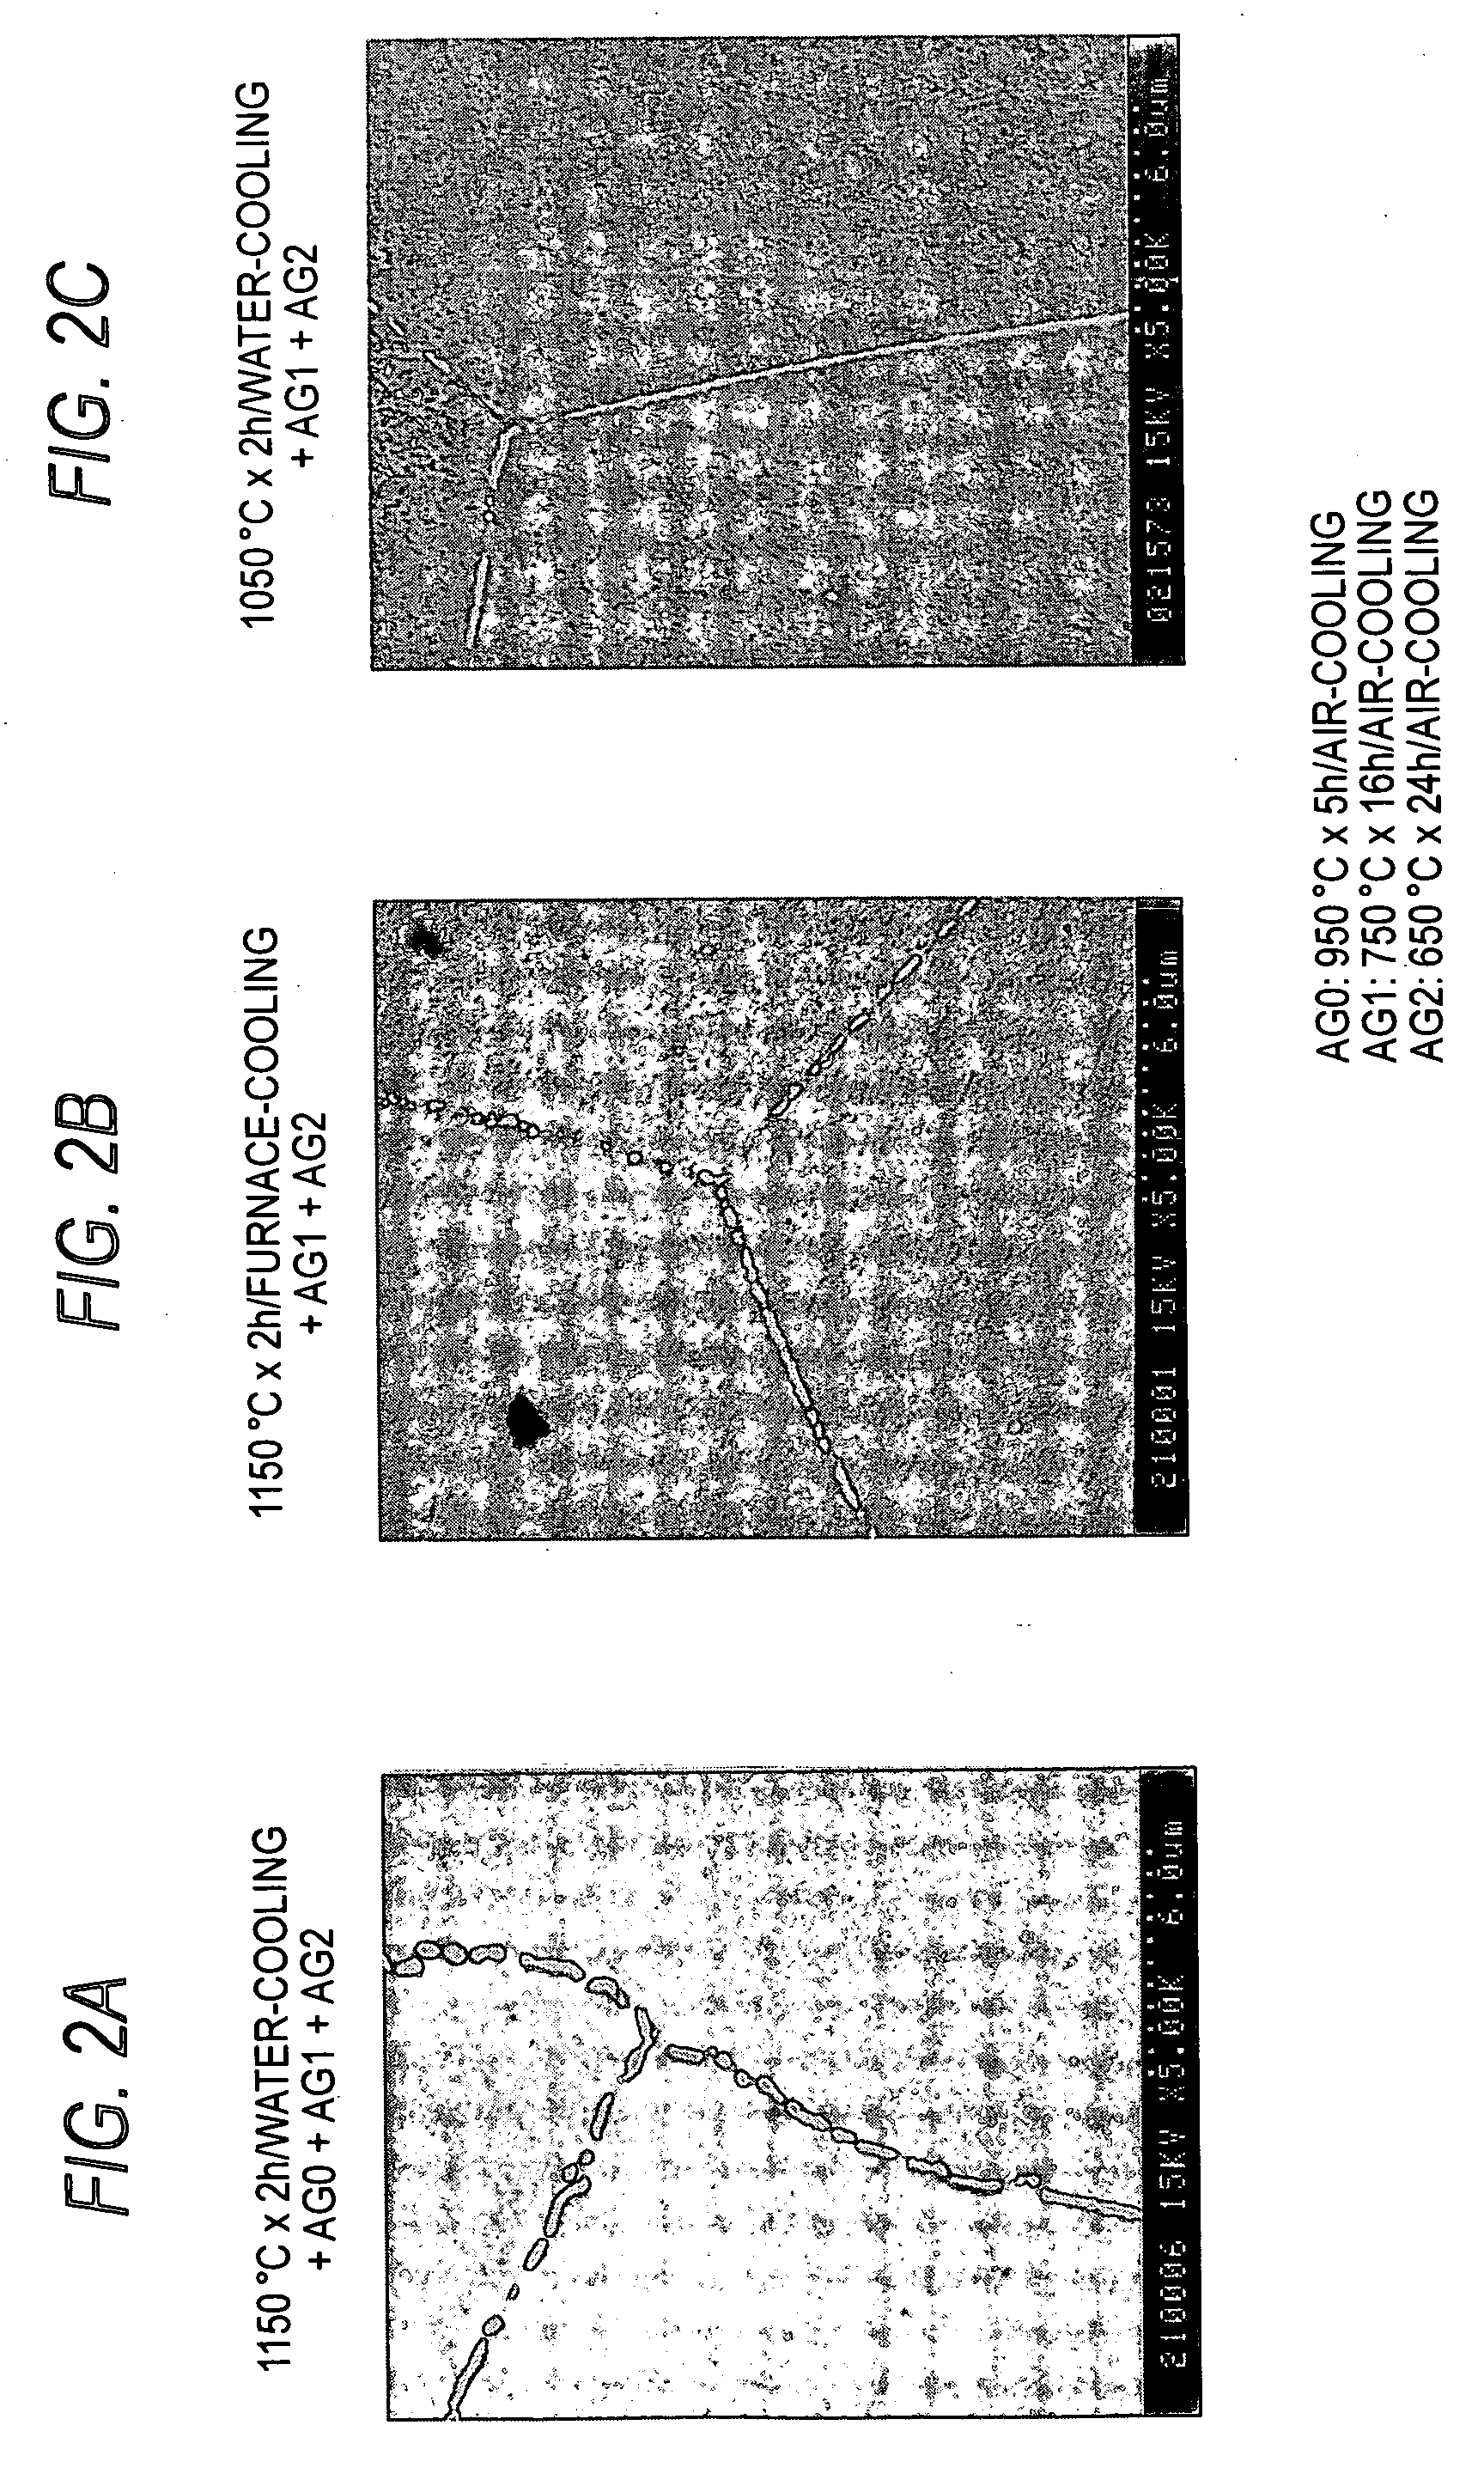 Method for producing low thermal expansion Ni-base superalloy